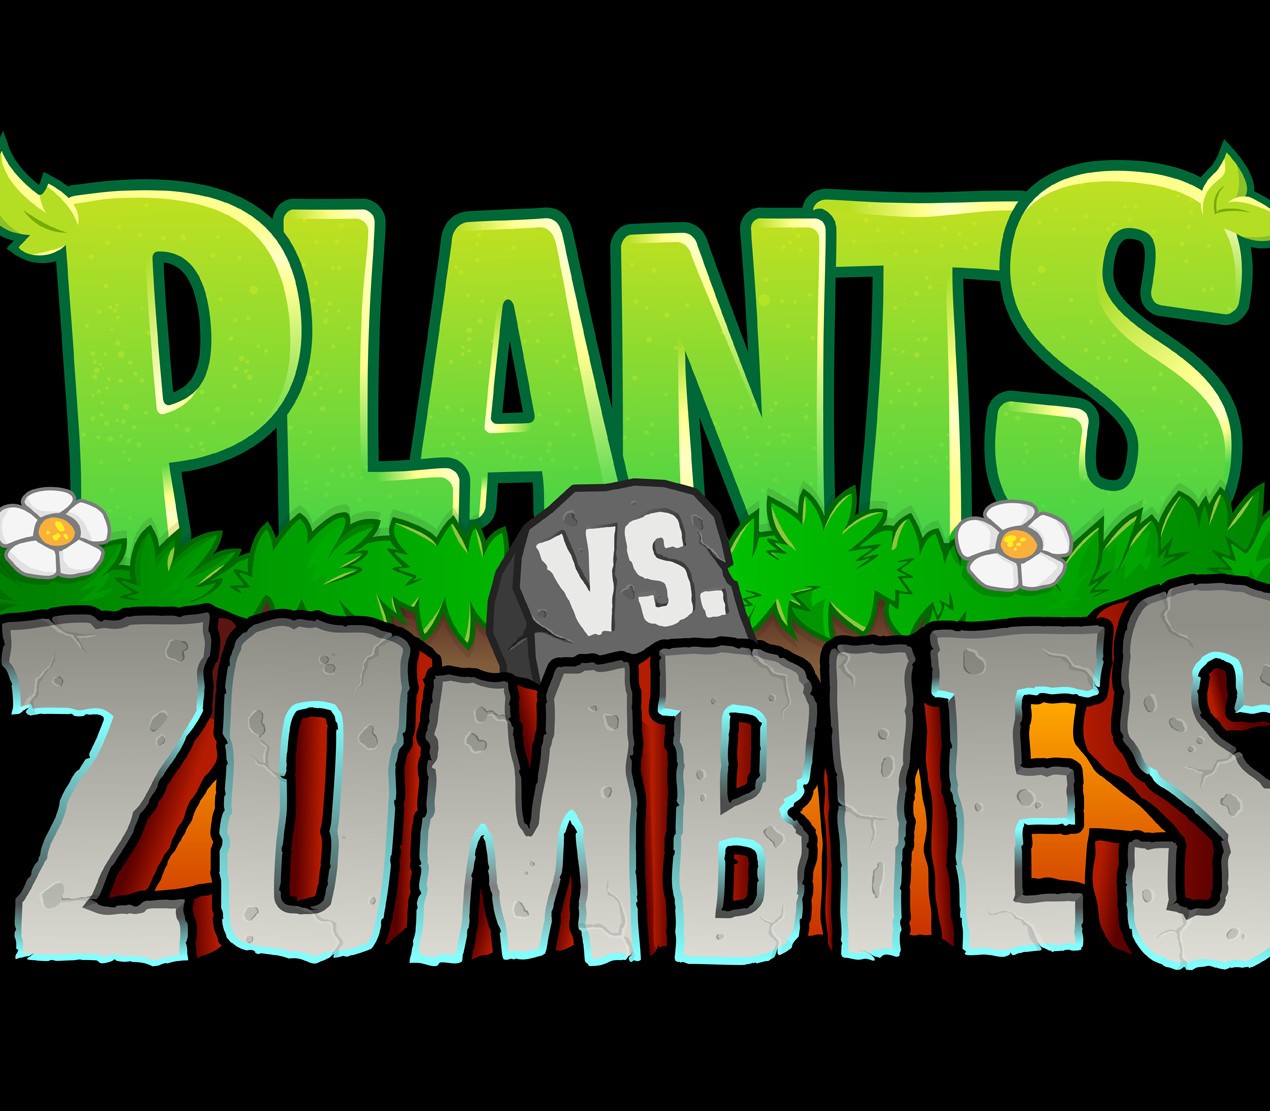 Plants vs. Zombies Game of the Year Edition - PC Digital [Origin